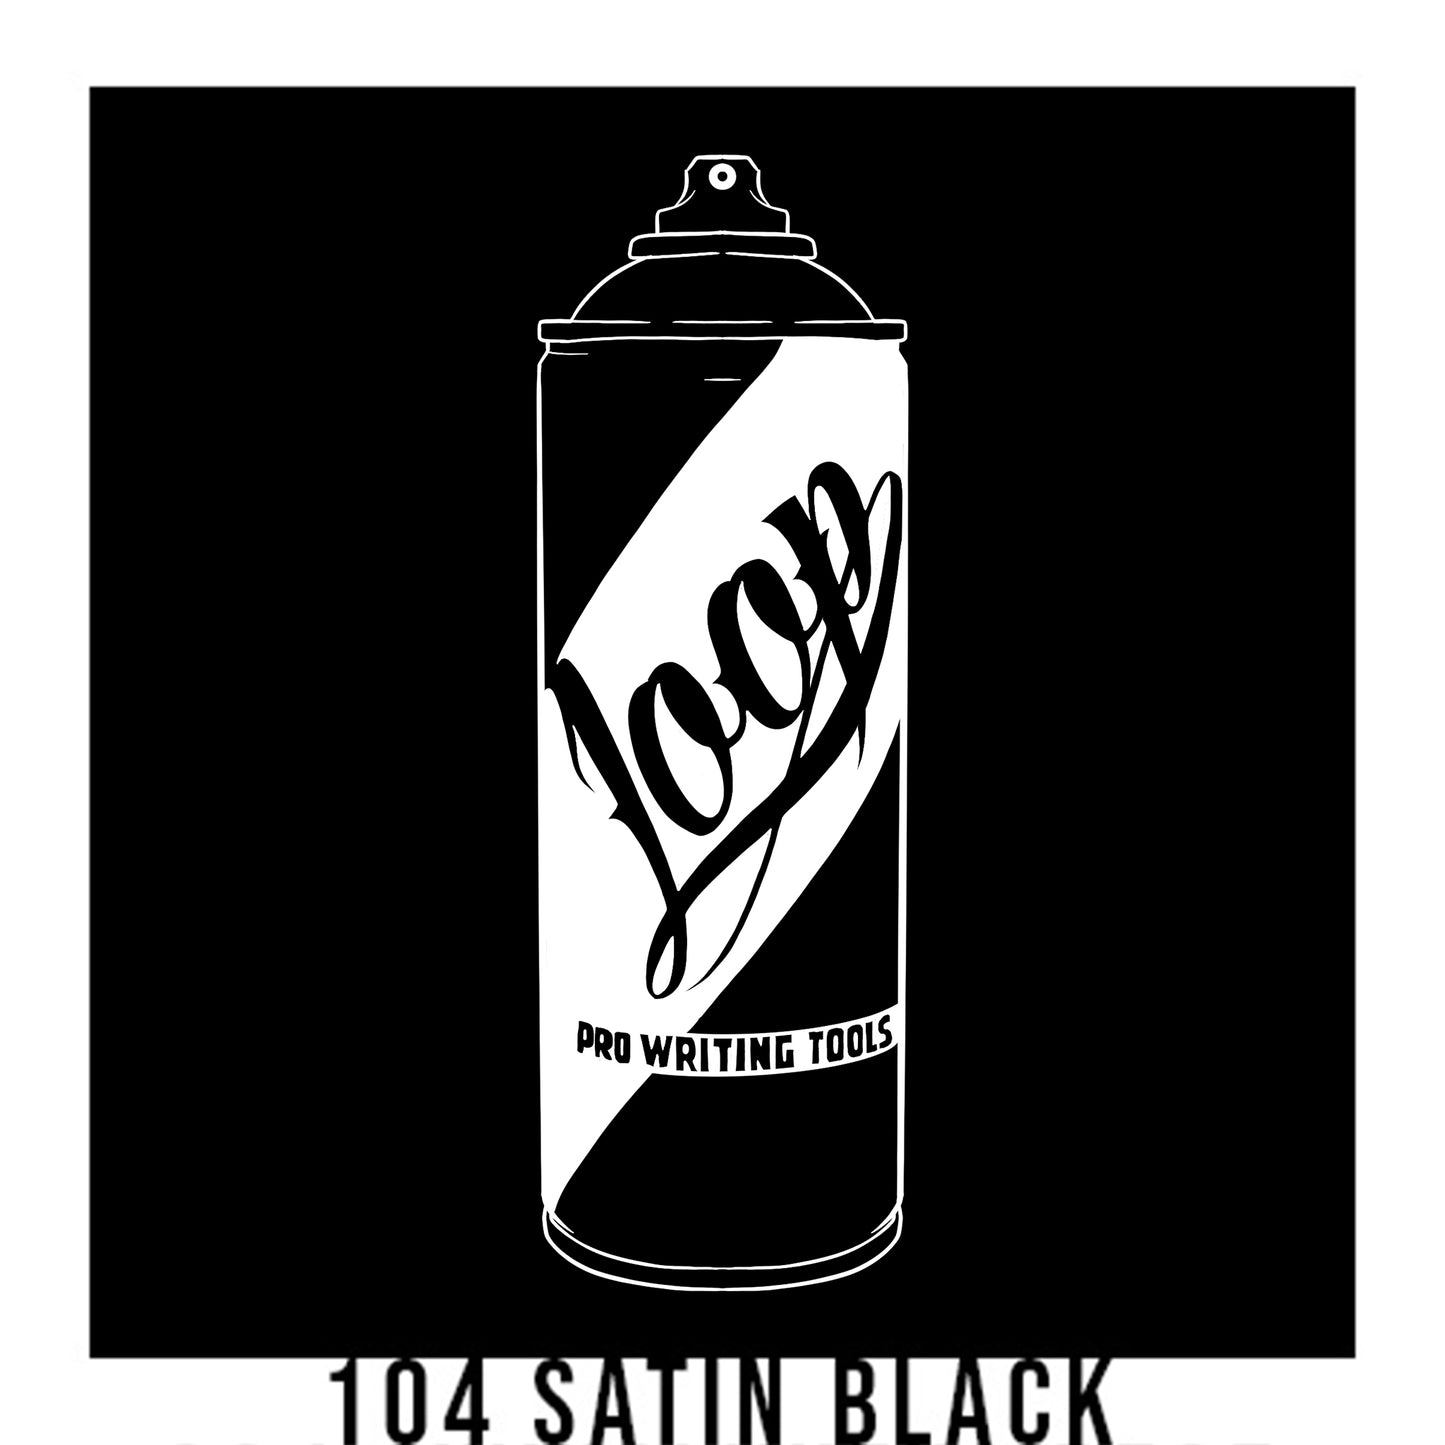 A white outline drawing of a black spray paint can with the word "Loop" written on the face in script. The background is a black color swatch with a white border with the words "104 Satin Black" at the bottom.